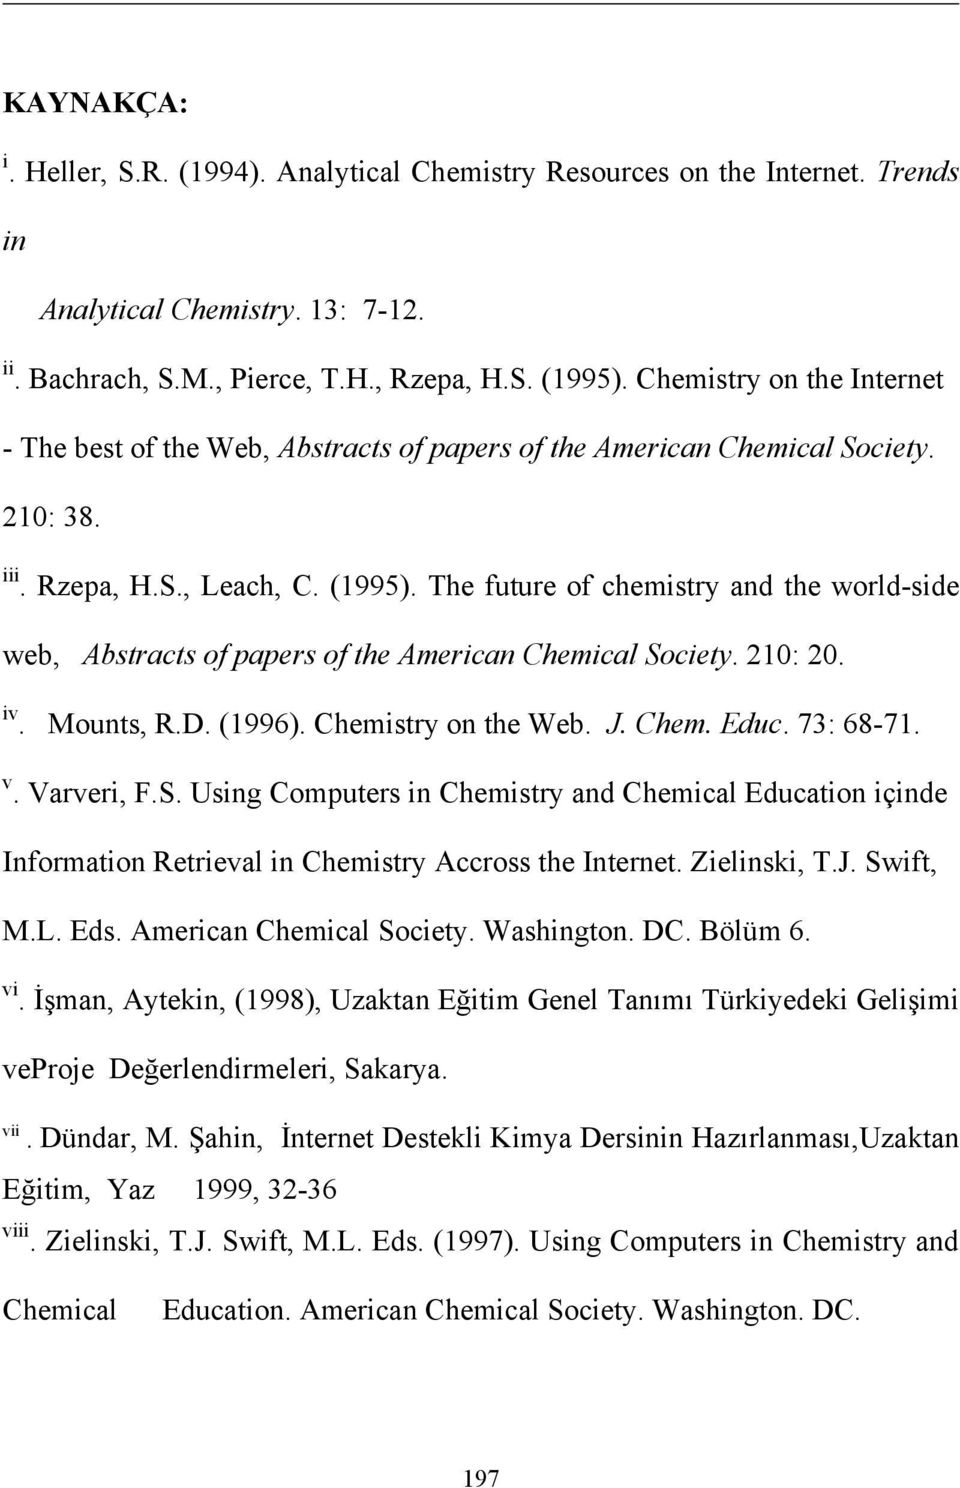 The future of chemistry and the world-side web, Abstracts of papers of the American Chemical So